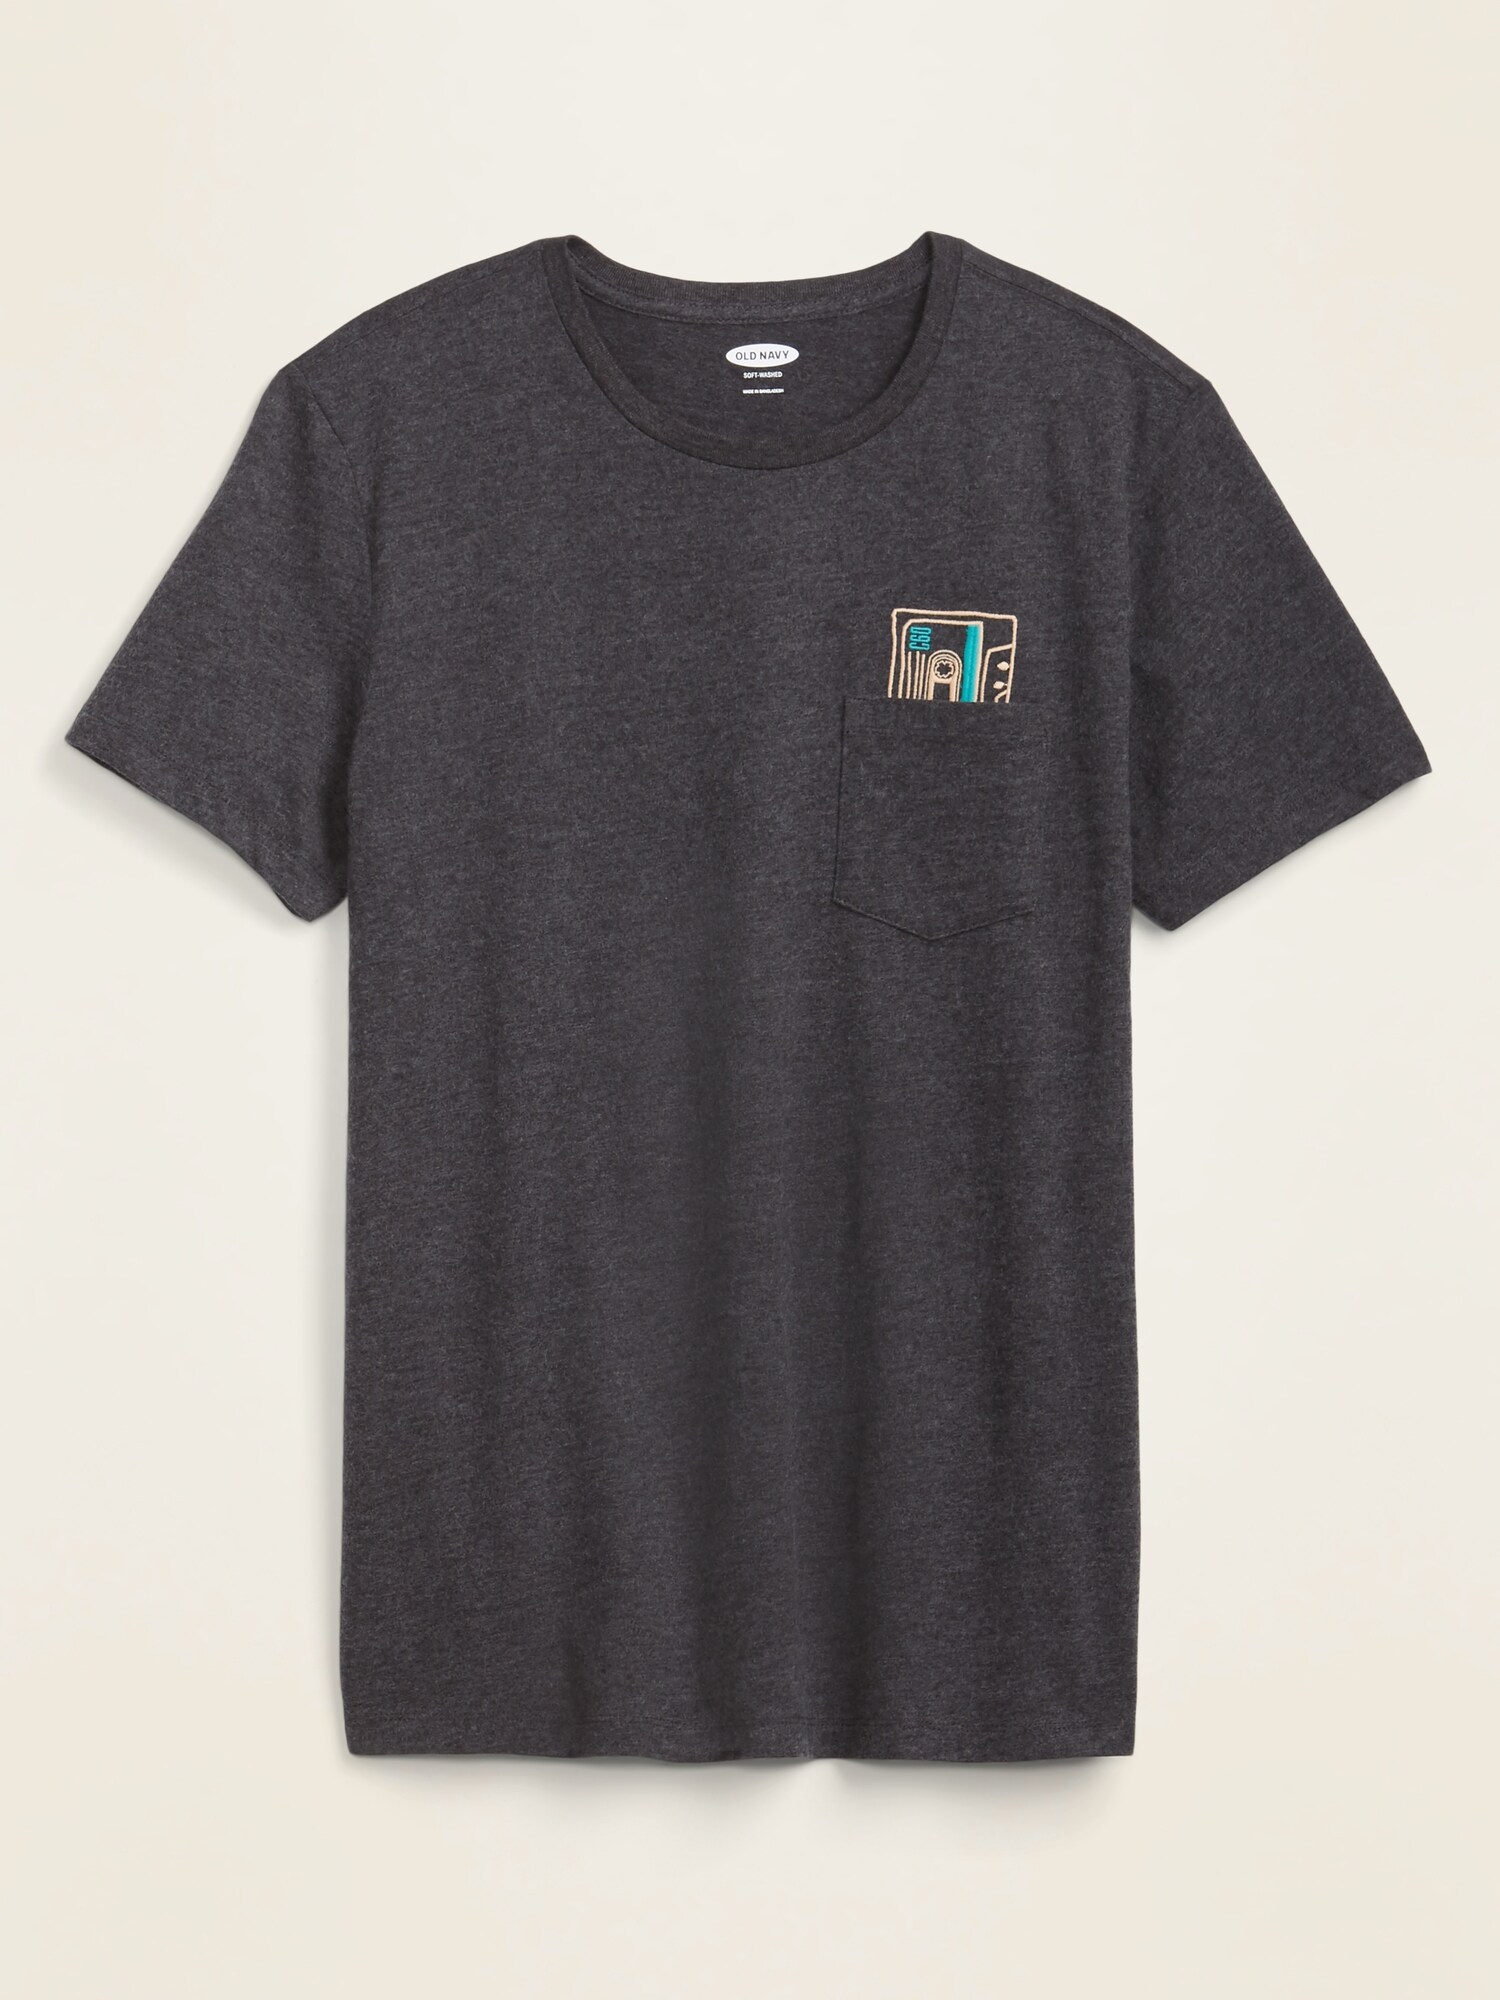 Soft-Washed Embroidered-Graphic Tee for Men